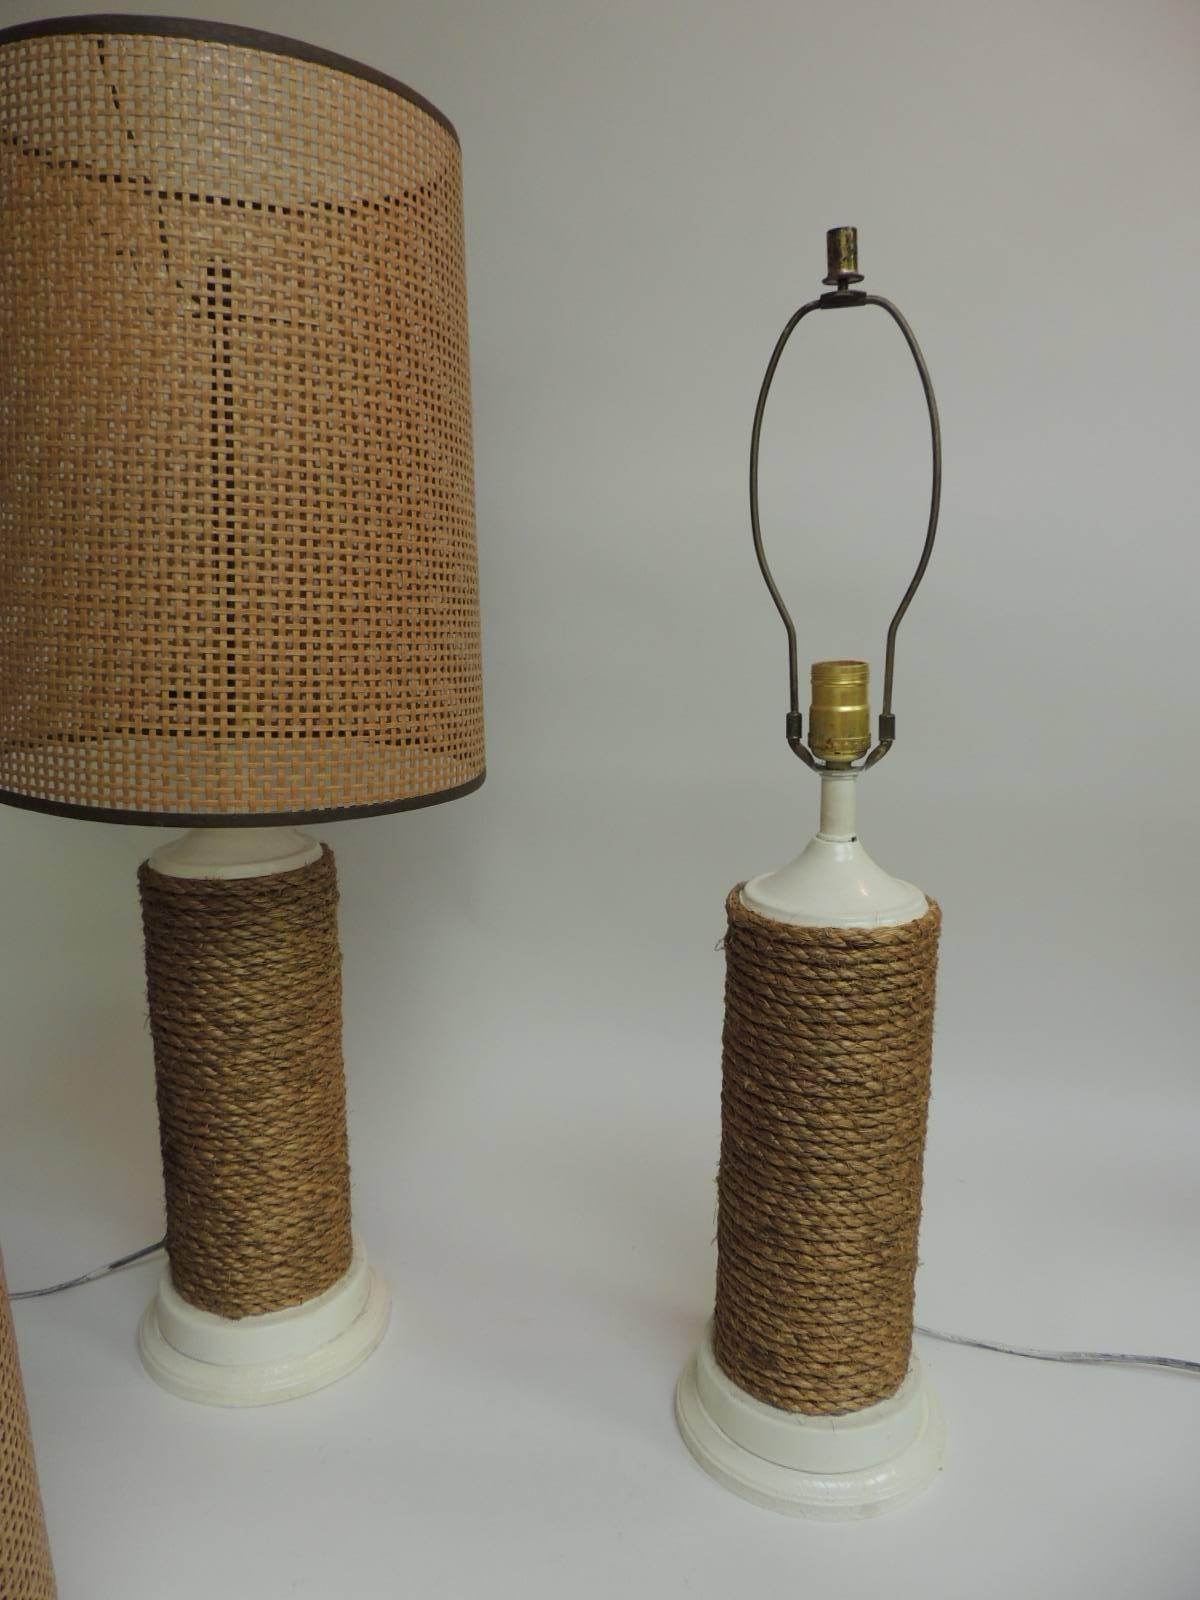 Nautical lamps wrapped in twine rope over wood, round painted wood bases, brass fittings,
Original woven shades (in excellent conditions) and harps.
Size: to harp 28 H - to socket 19 H x 6 D
Shades sizes: 11 x 11 x 15 H
High to shade on lamp: 31.
 